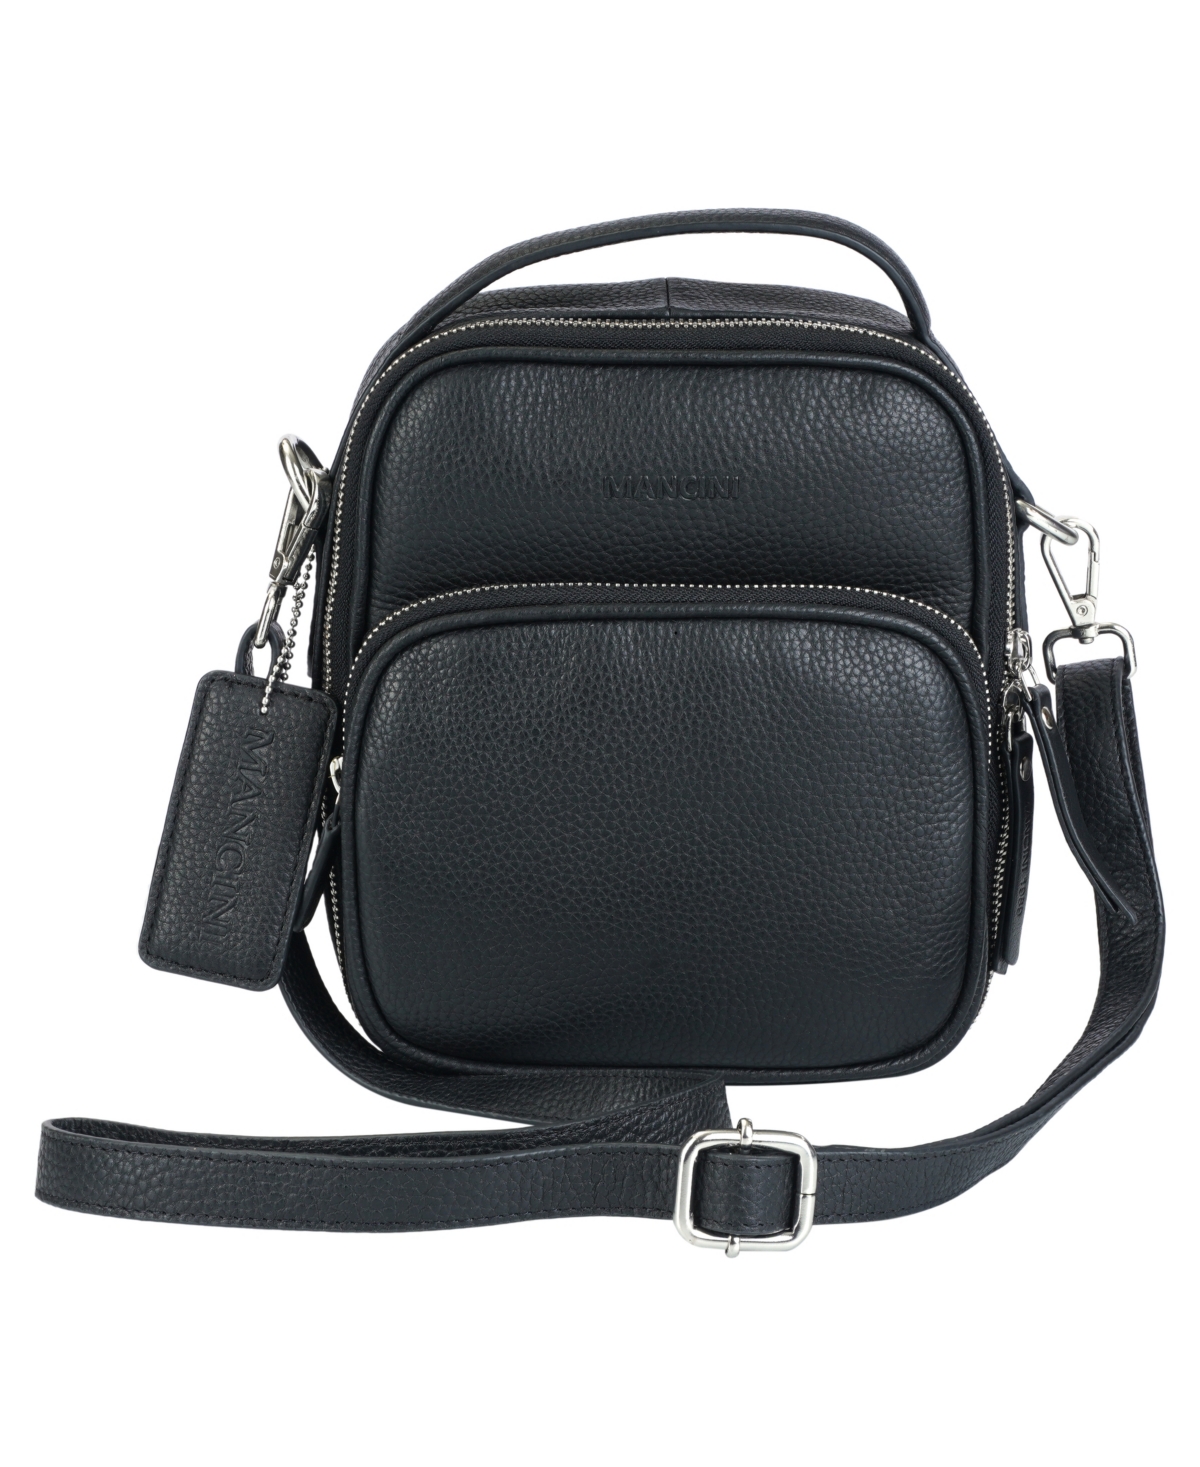 Mancini Pebbled Collection Daisy North-south Leather Crossbody Bag In Black